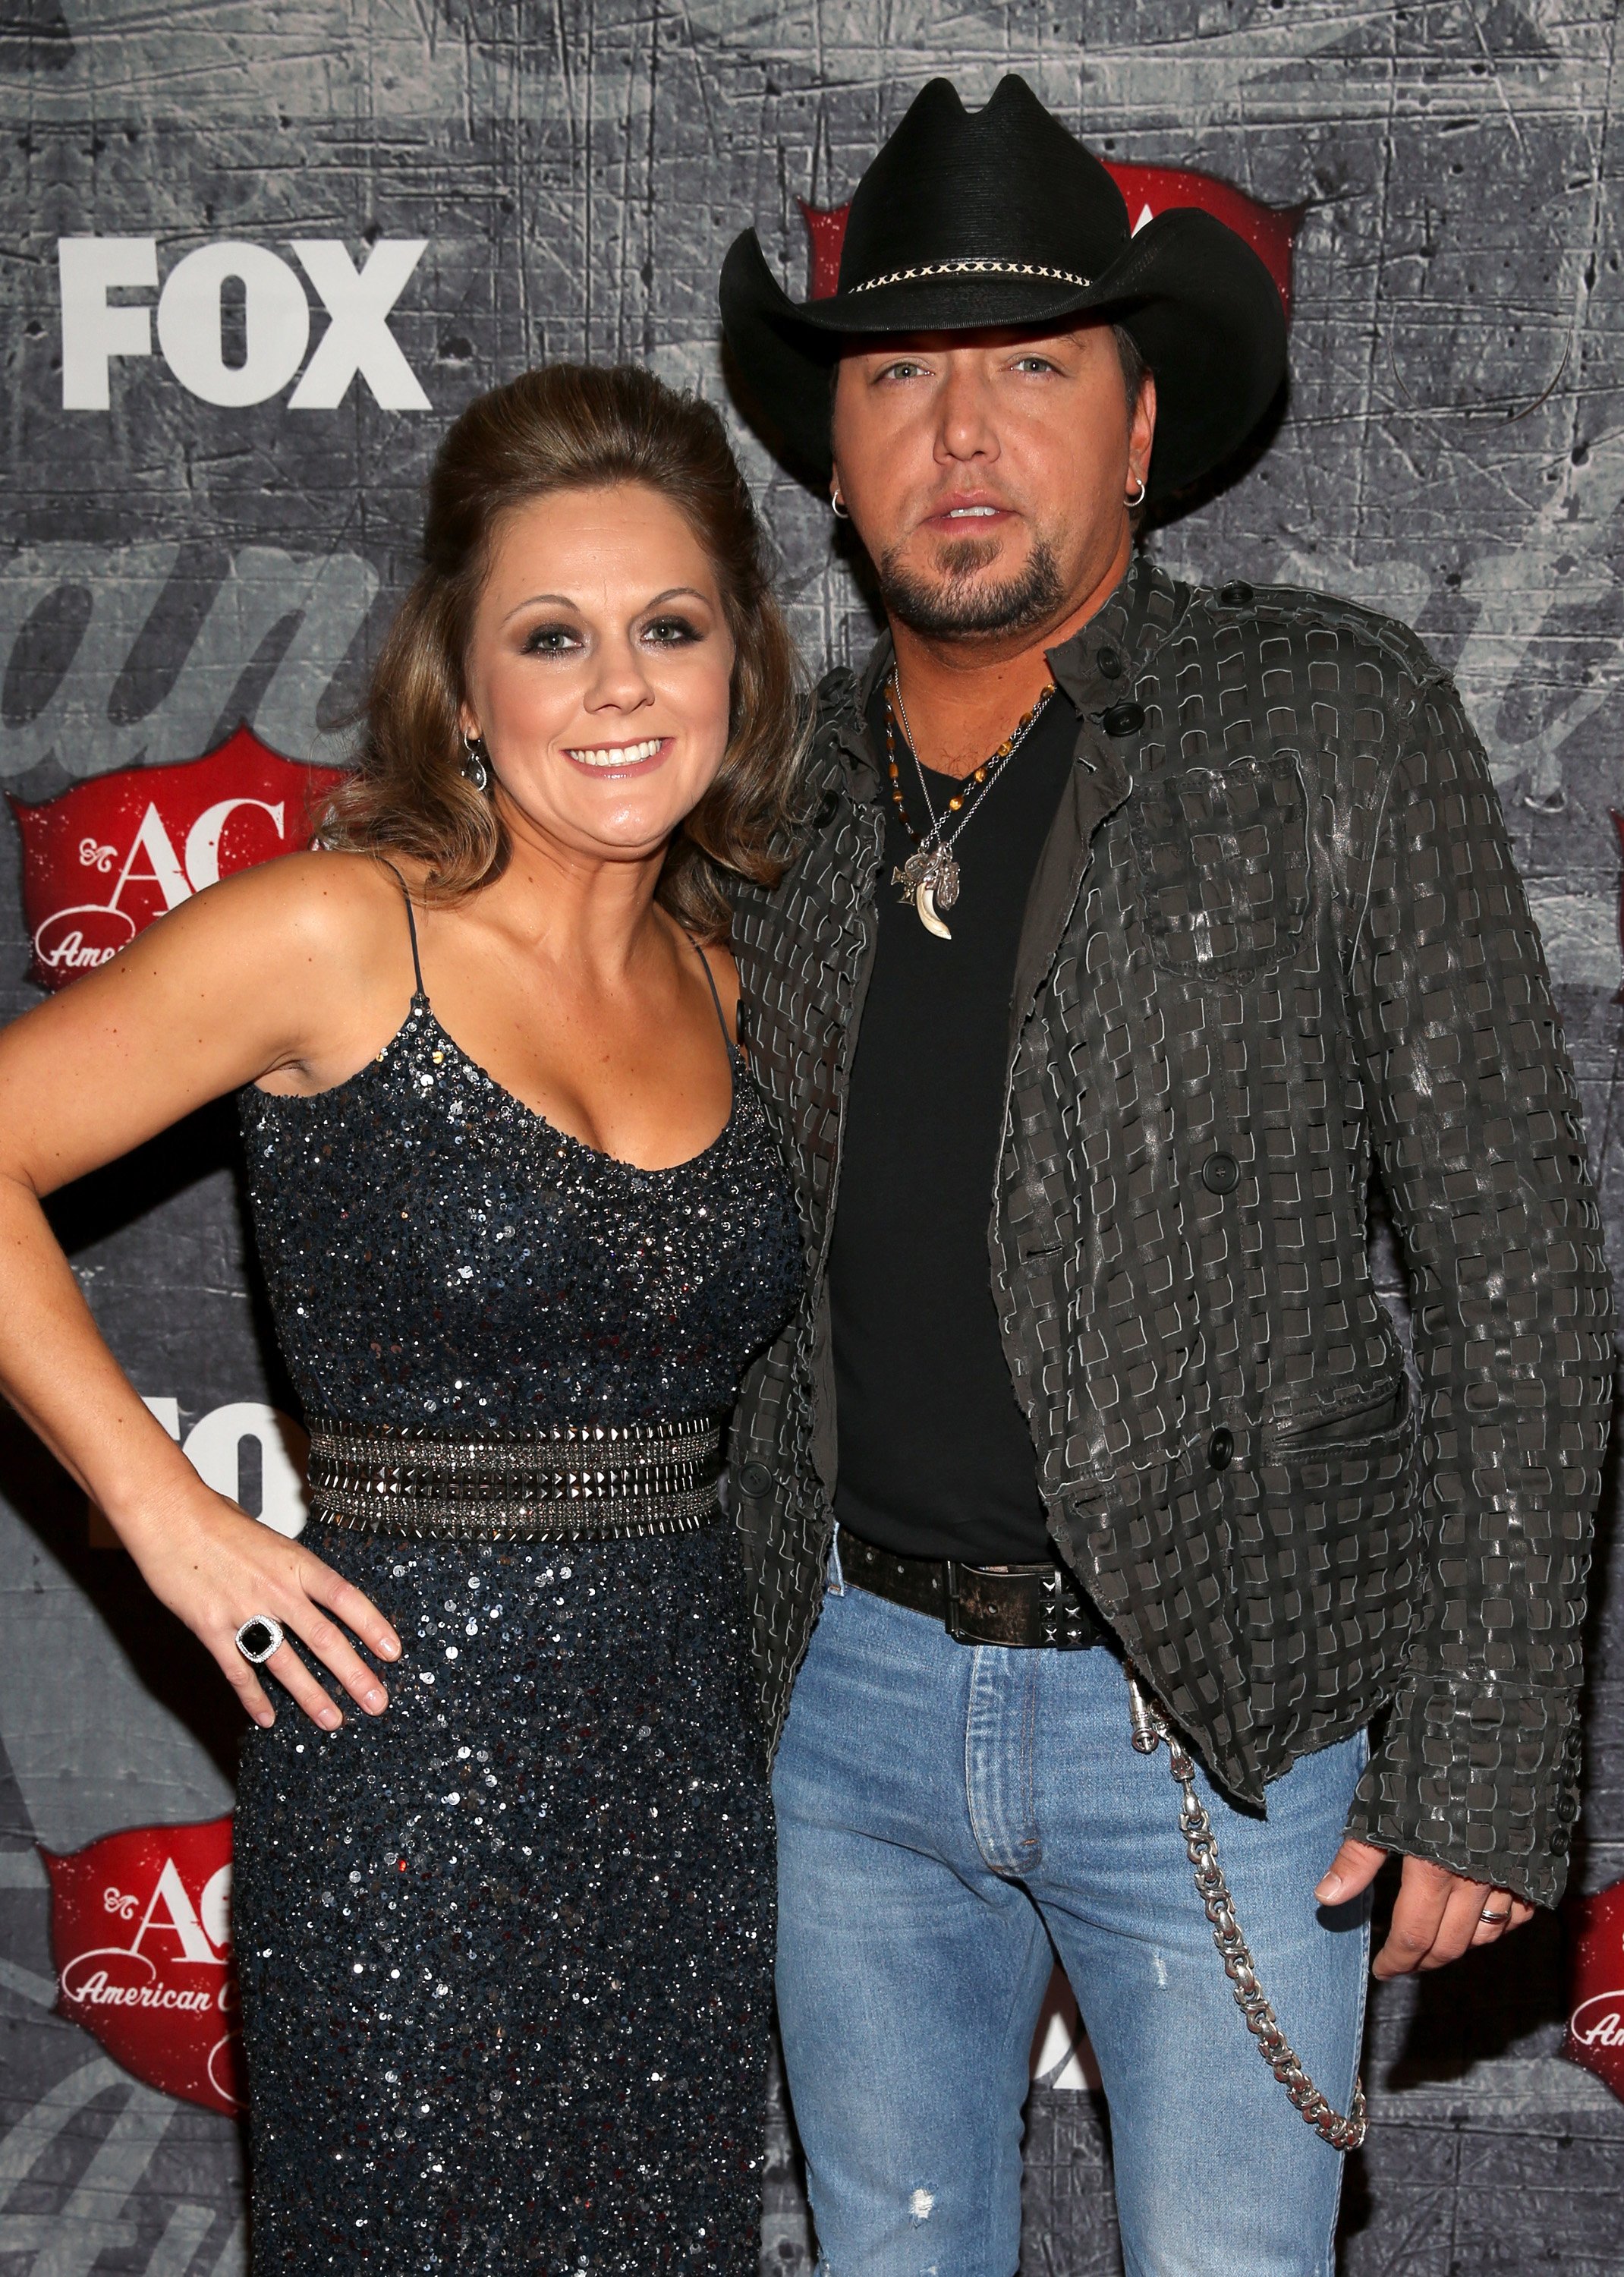 Jessica Ussery and Jason Aldean at the American Country Awards on December 10, 2012, in Las Vegas, Nevada | Source: Getty Images